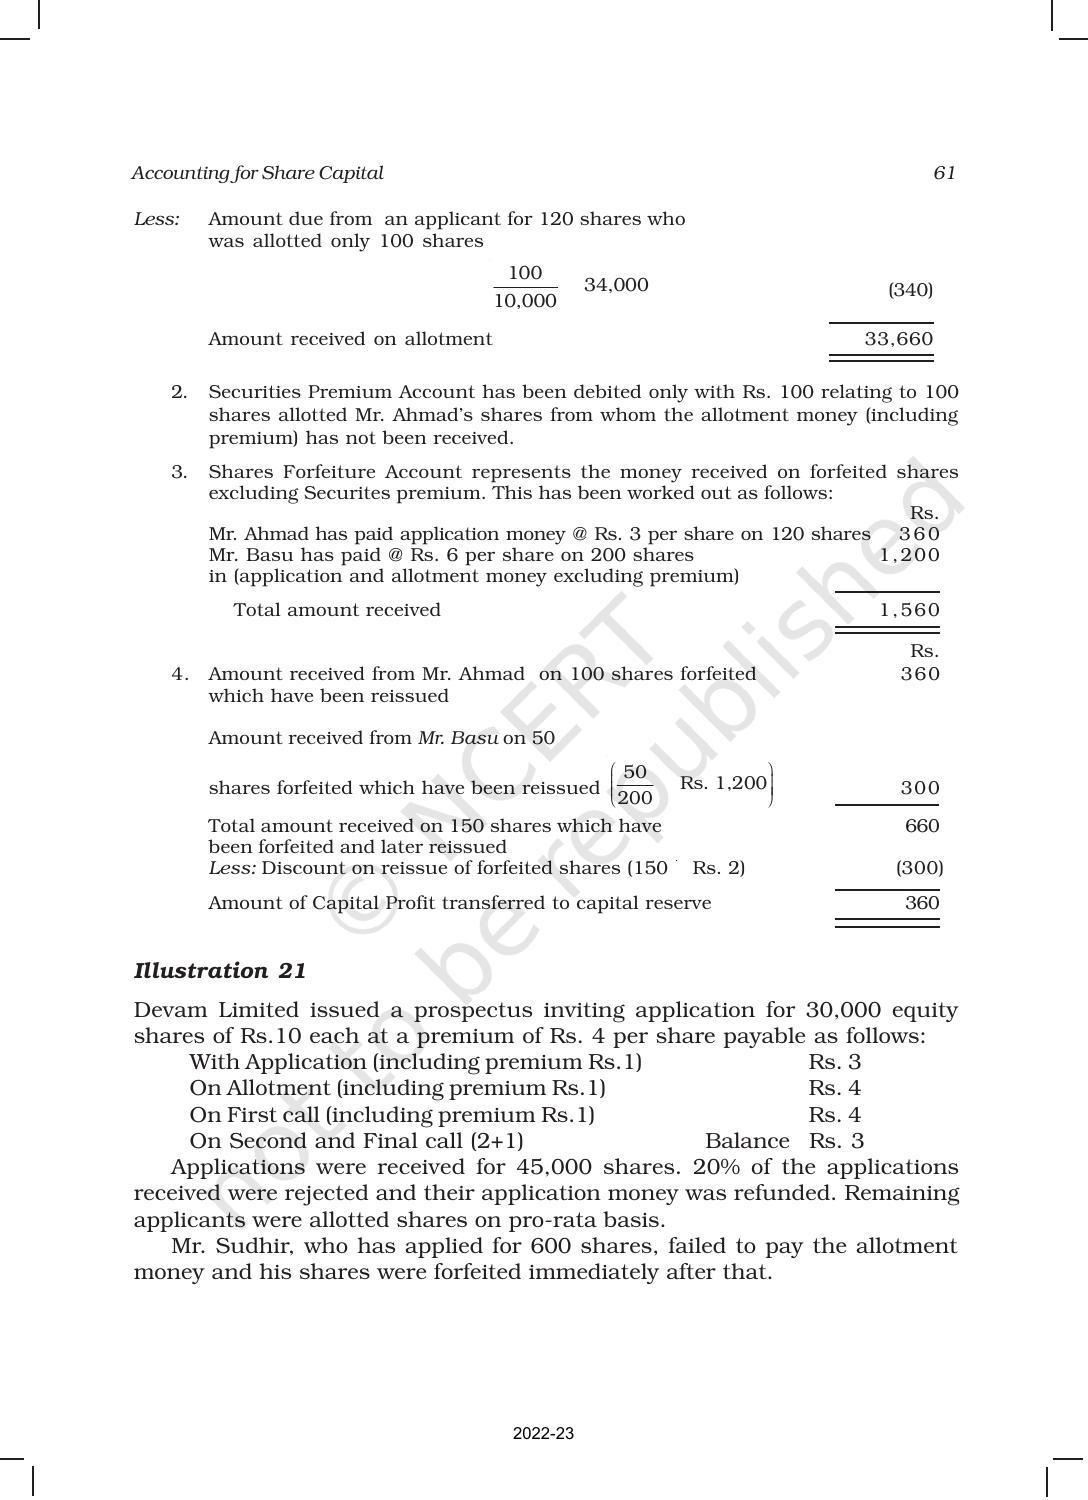 NCERT Book for Class 12 Accountancy Part II Chapter 1 Accounting for Share Capital - Page 61